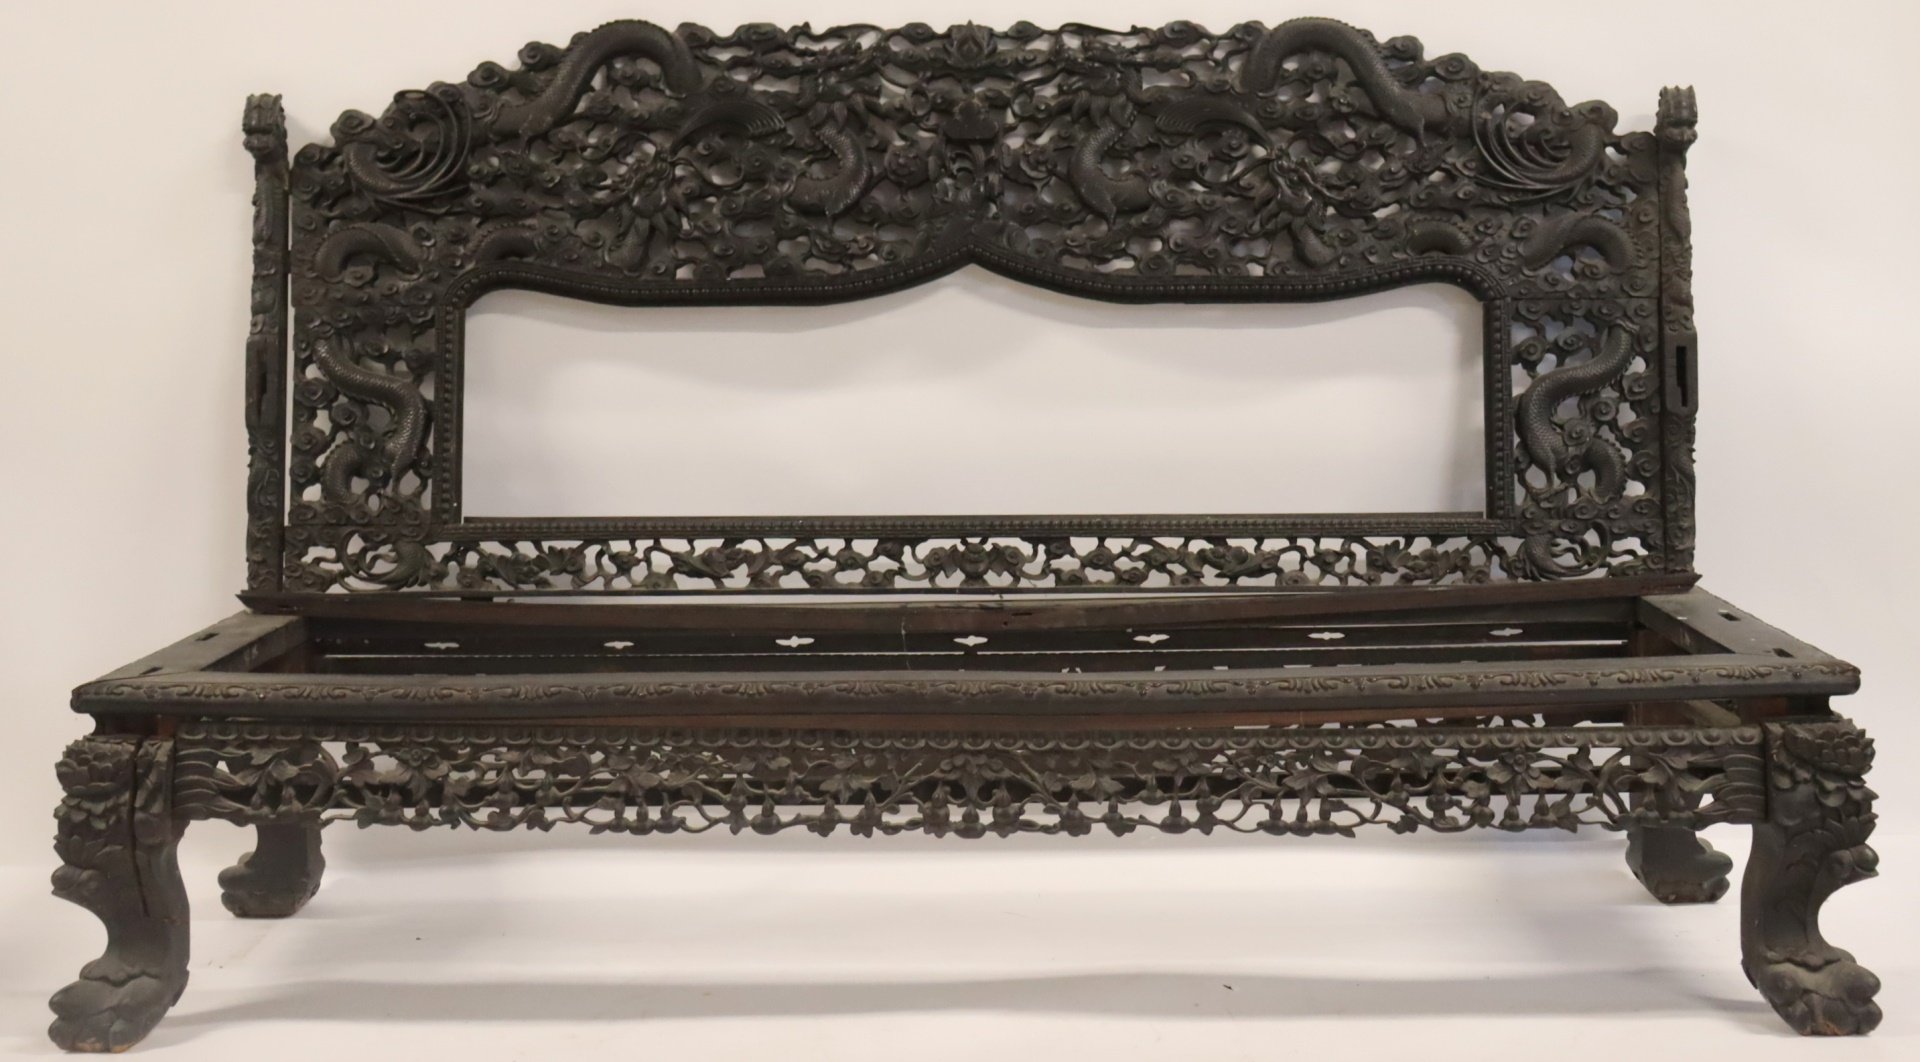 HIGHLY FINELY CARVED ASIAN HARDWOOD 3b734f